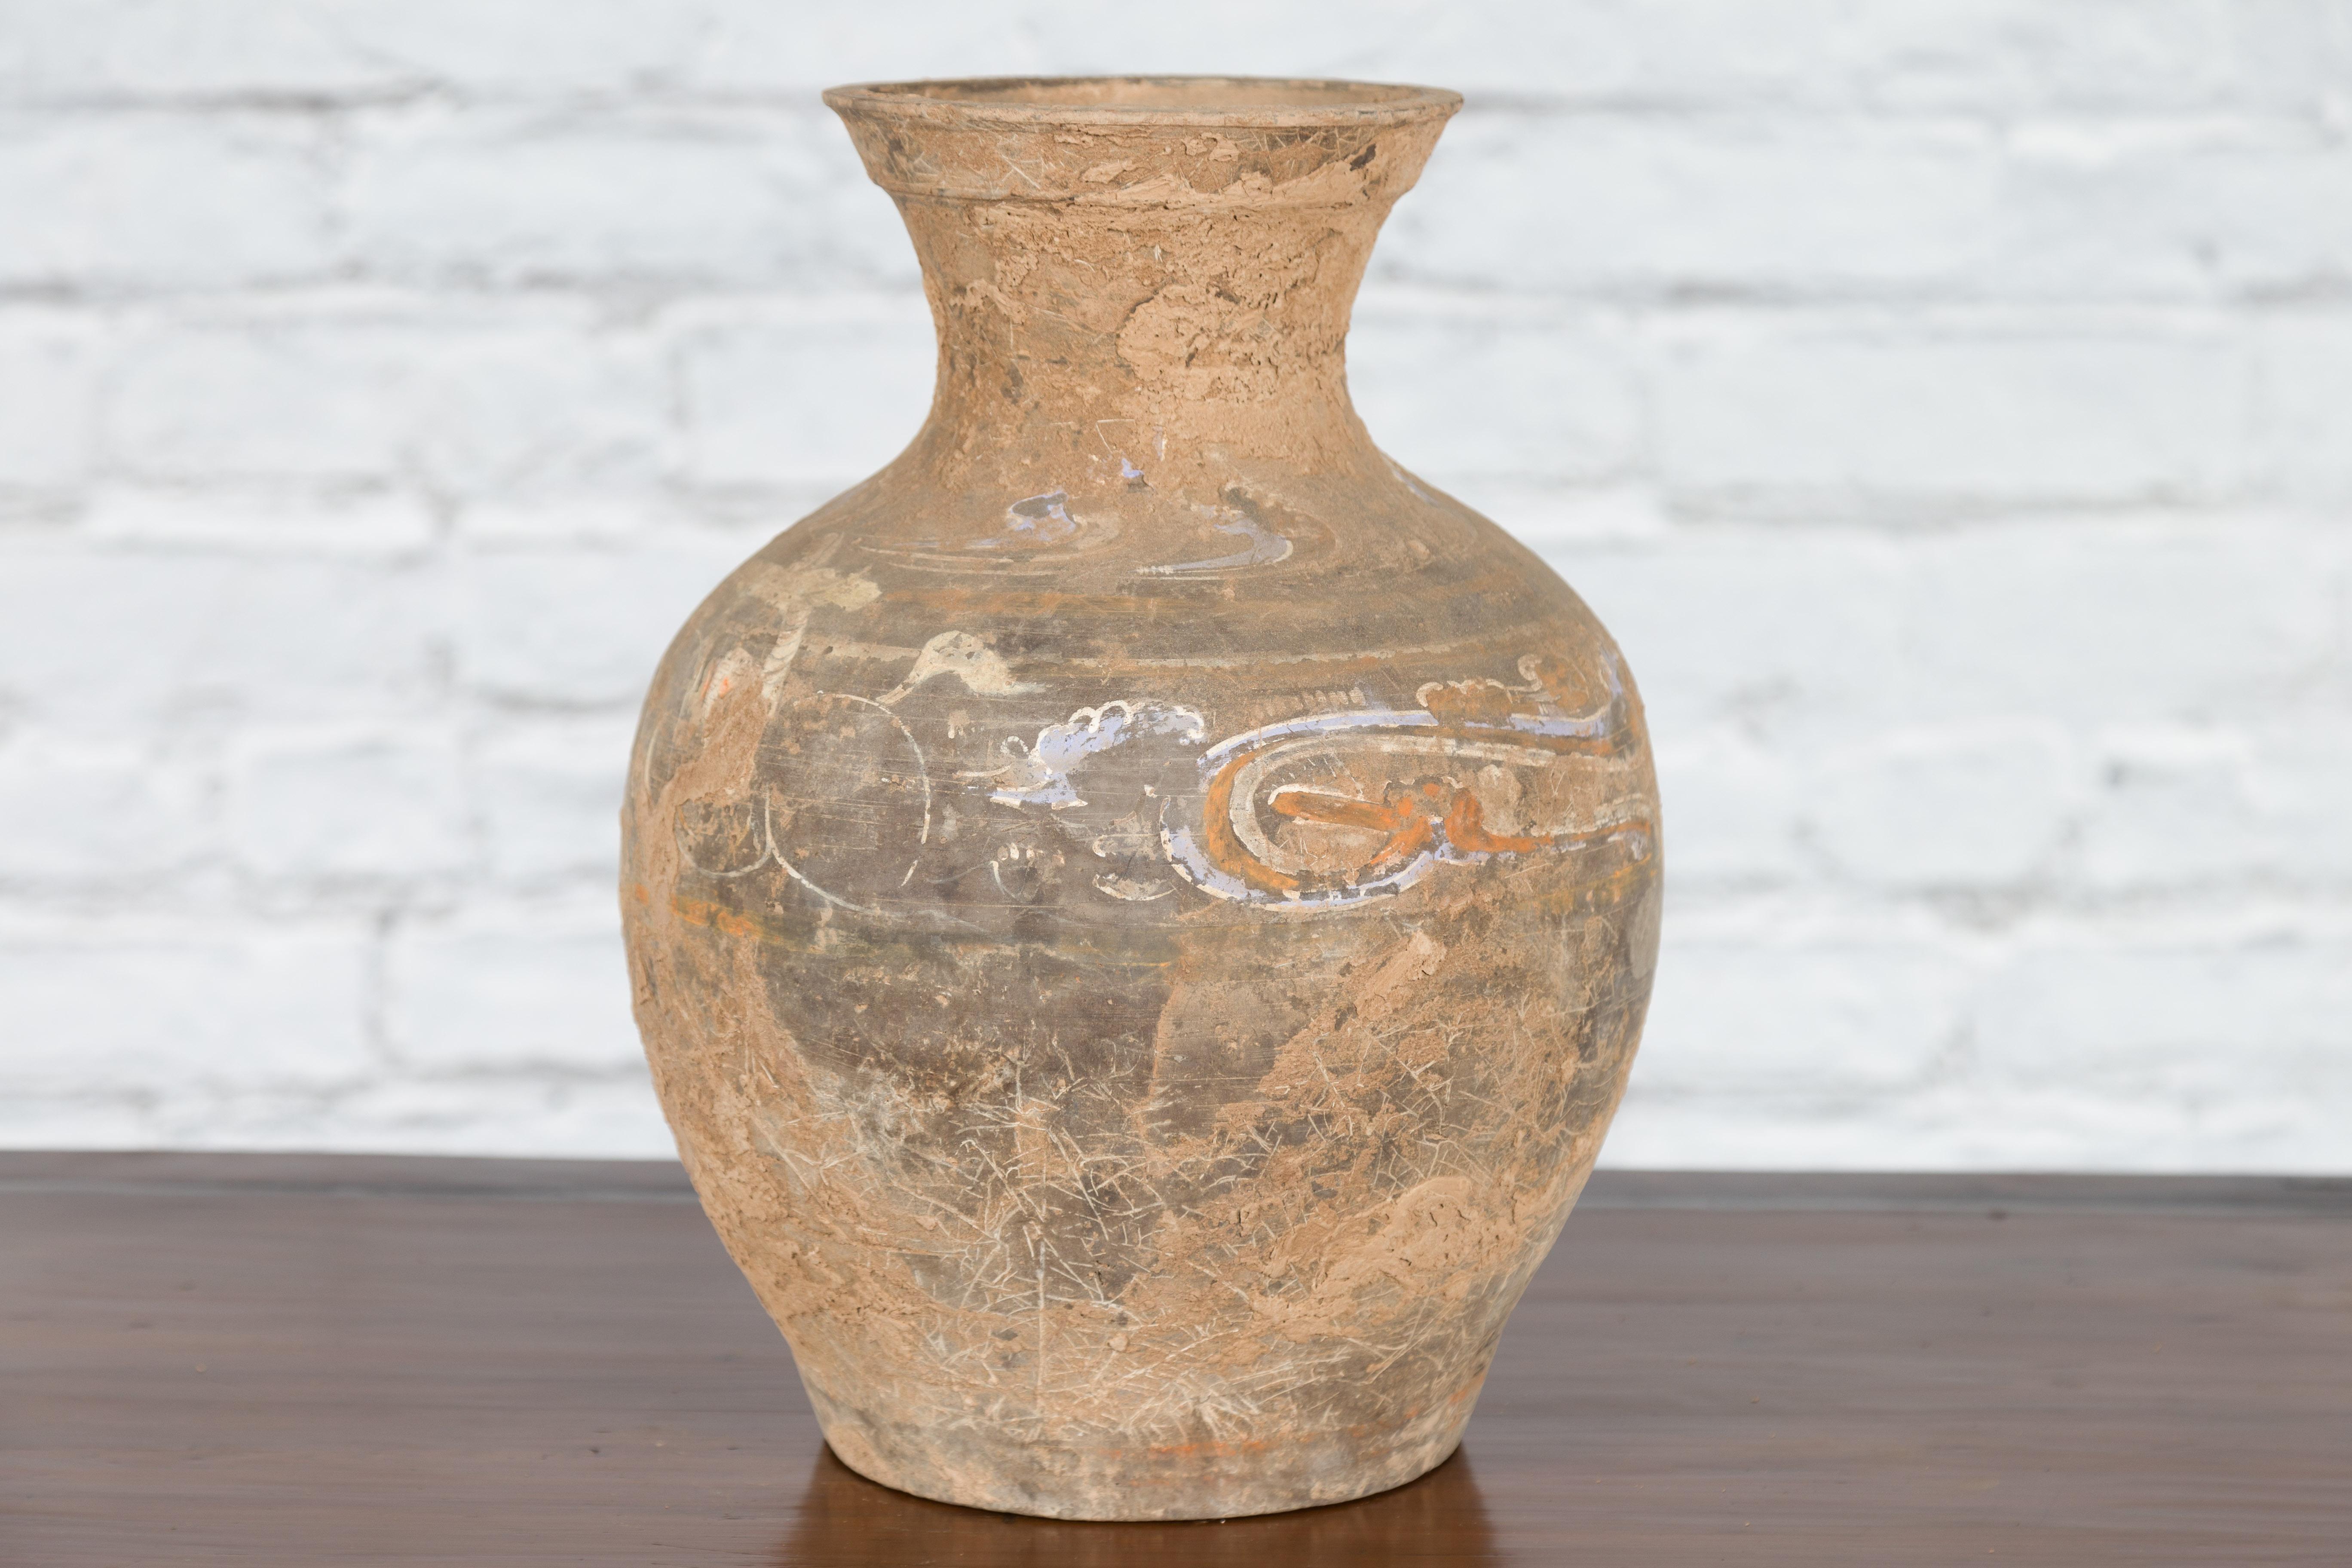 Chinese Han Dynasty Terracotta Vase with Hand-Painted Décor, circa 202 BC-200 AD 9